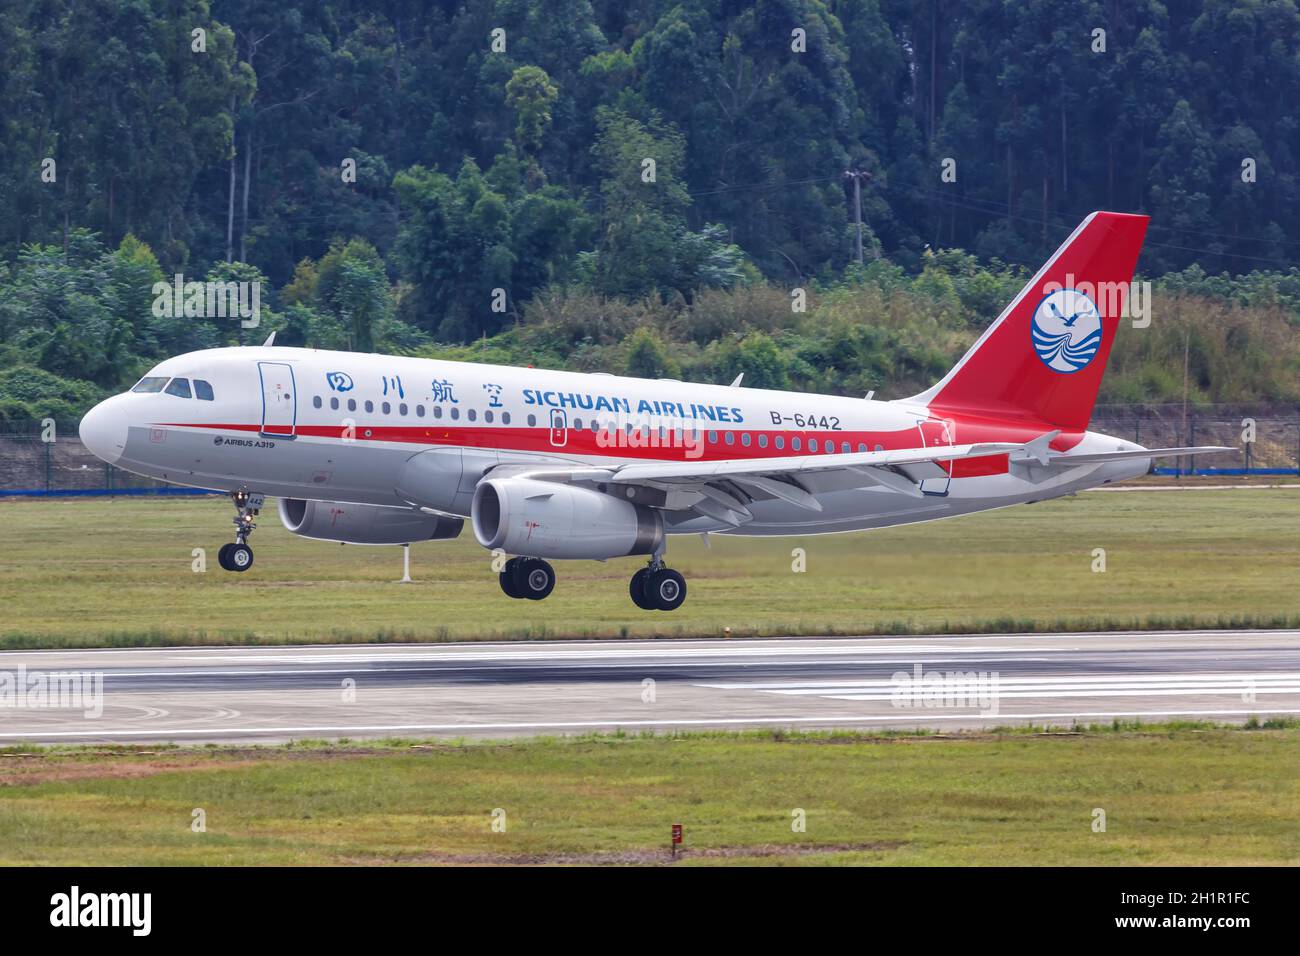 Chengdu, China - September 21, 2019: Sichuan Airlines Airbus A319 airplane at Chengdu Airport (CTU) in China. Airbus is a European aircraft manufactur Stock Photo